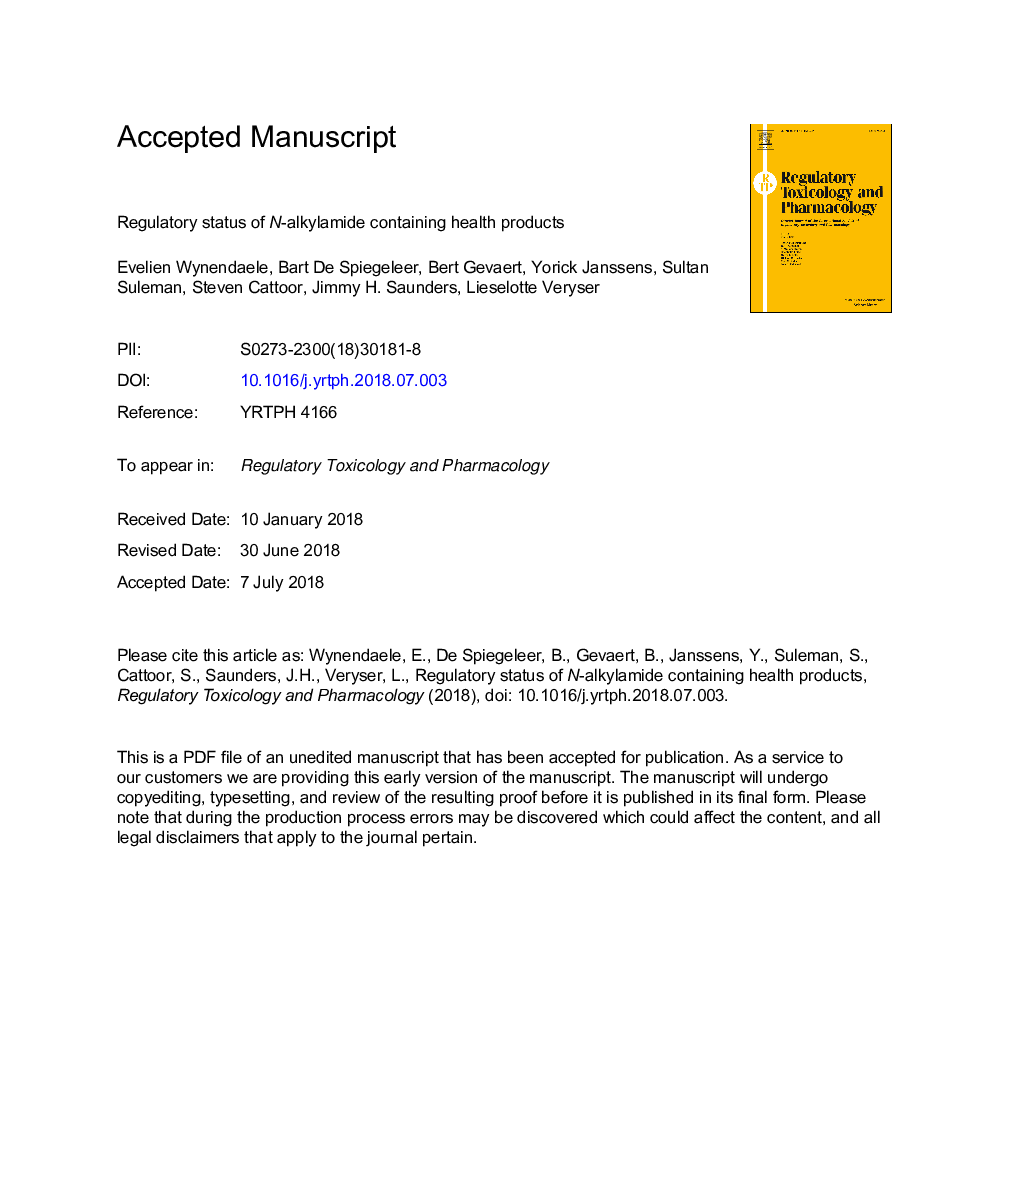 Regulatory status of N-alkylamide containing health products